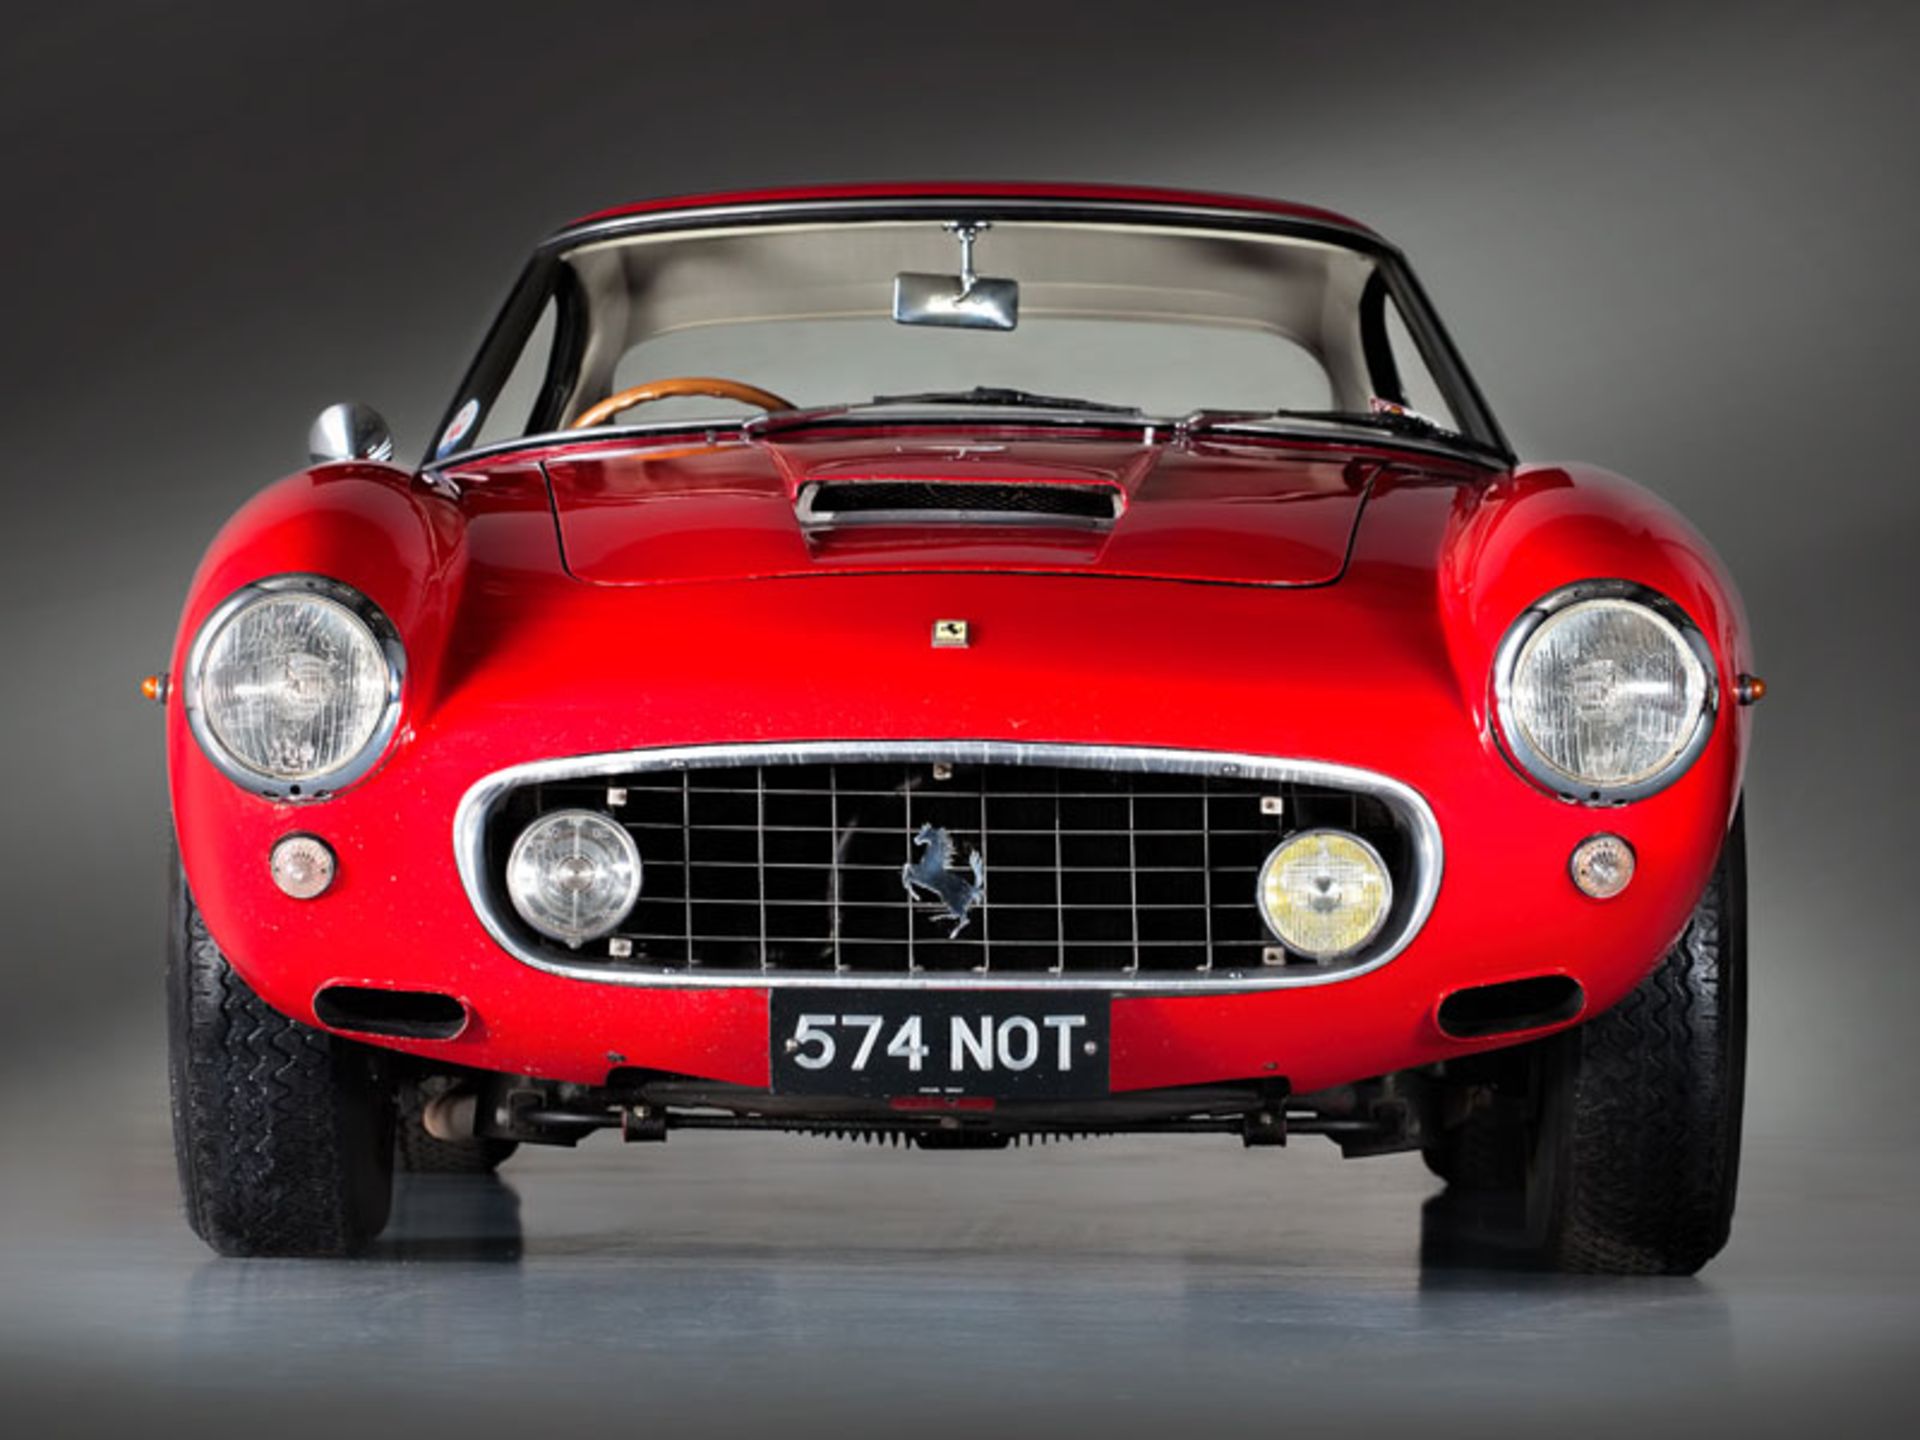 Registering to Bid on the Ferrari 250 GT SWB from the Richard Colton Collection:
- All - Image 2 of 10